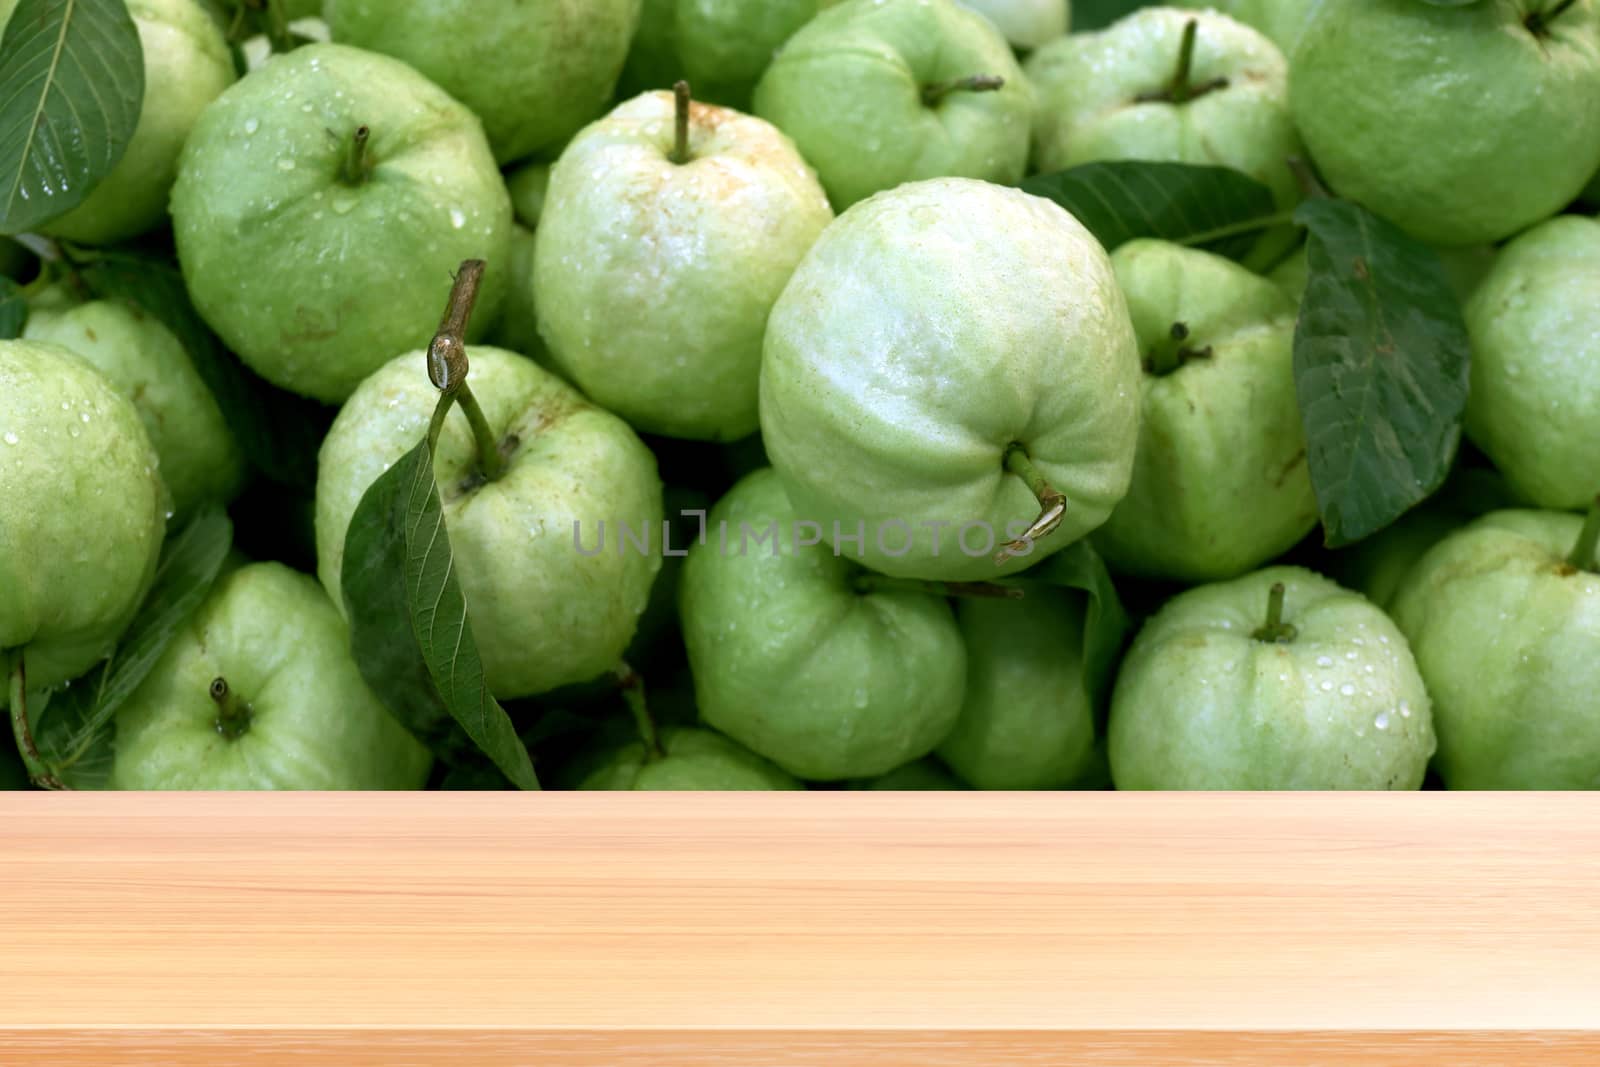 wood plank on guava fruit fresh background, empty wood table floors on guava organic green fresh view, wood table board empty front guava organic for mock up display products guava juice clean food by cgdeaw